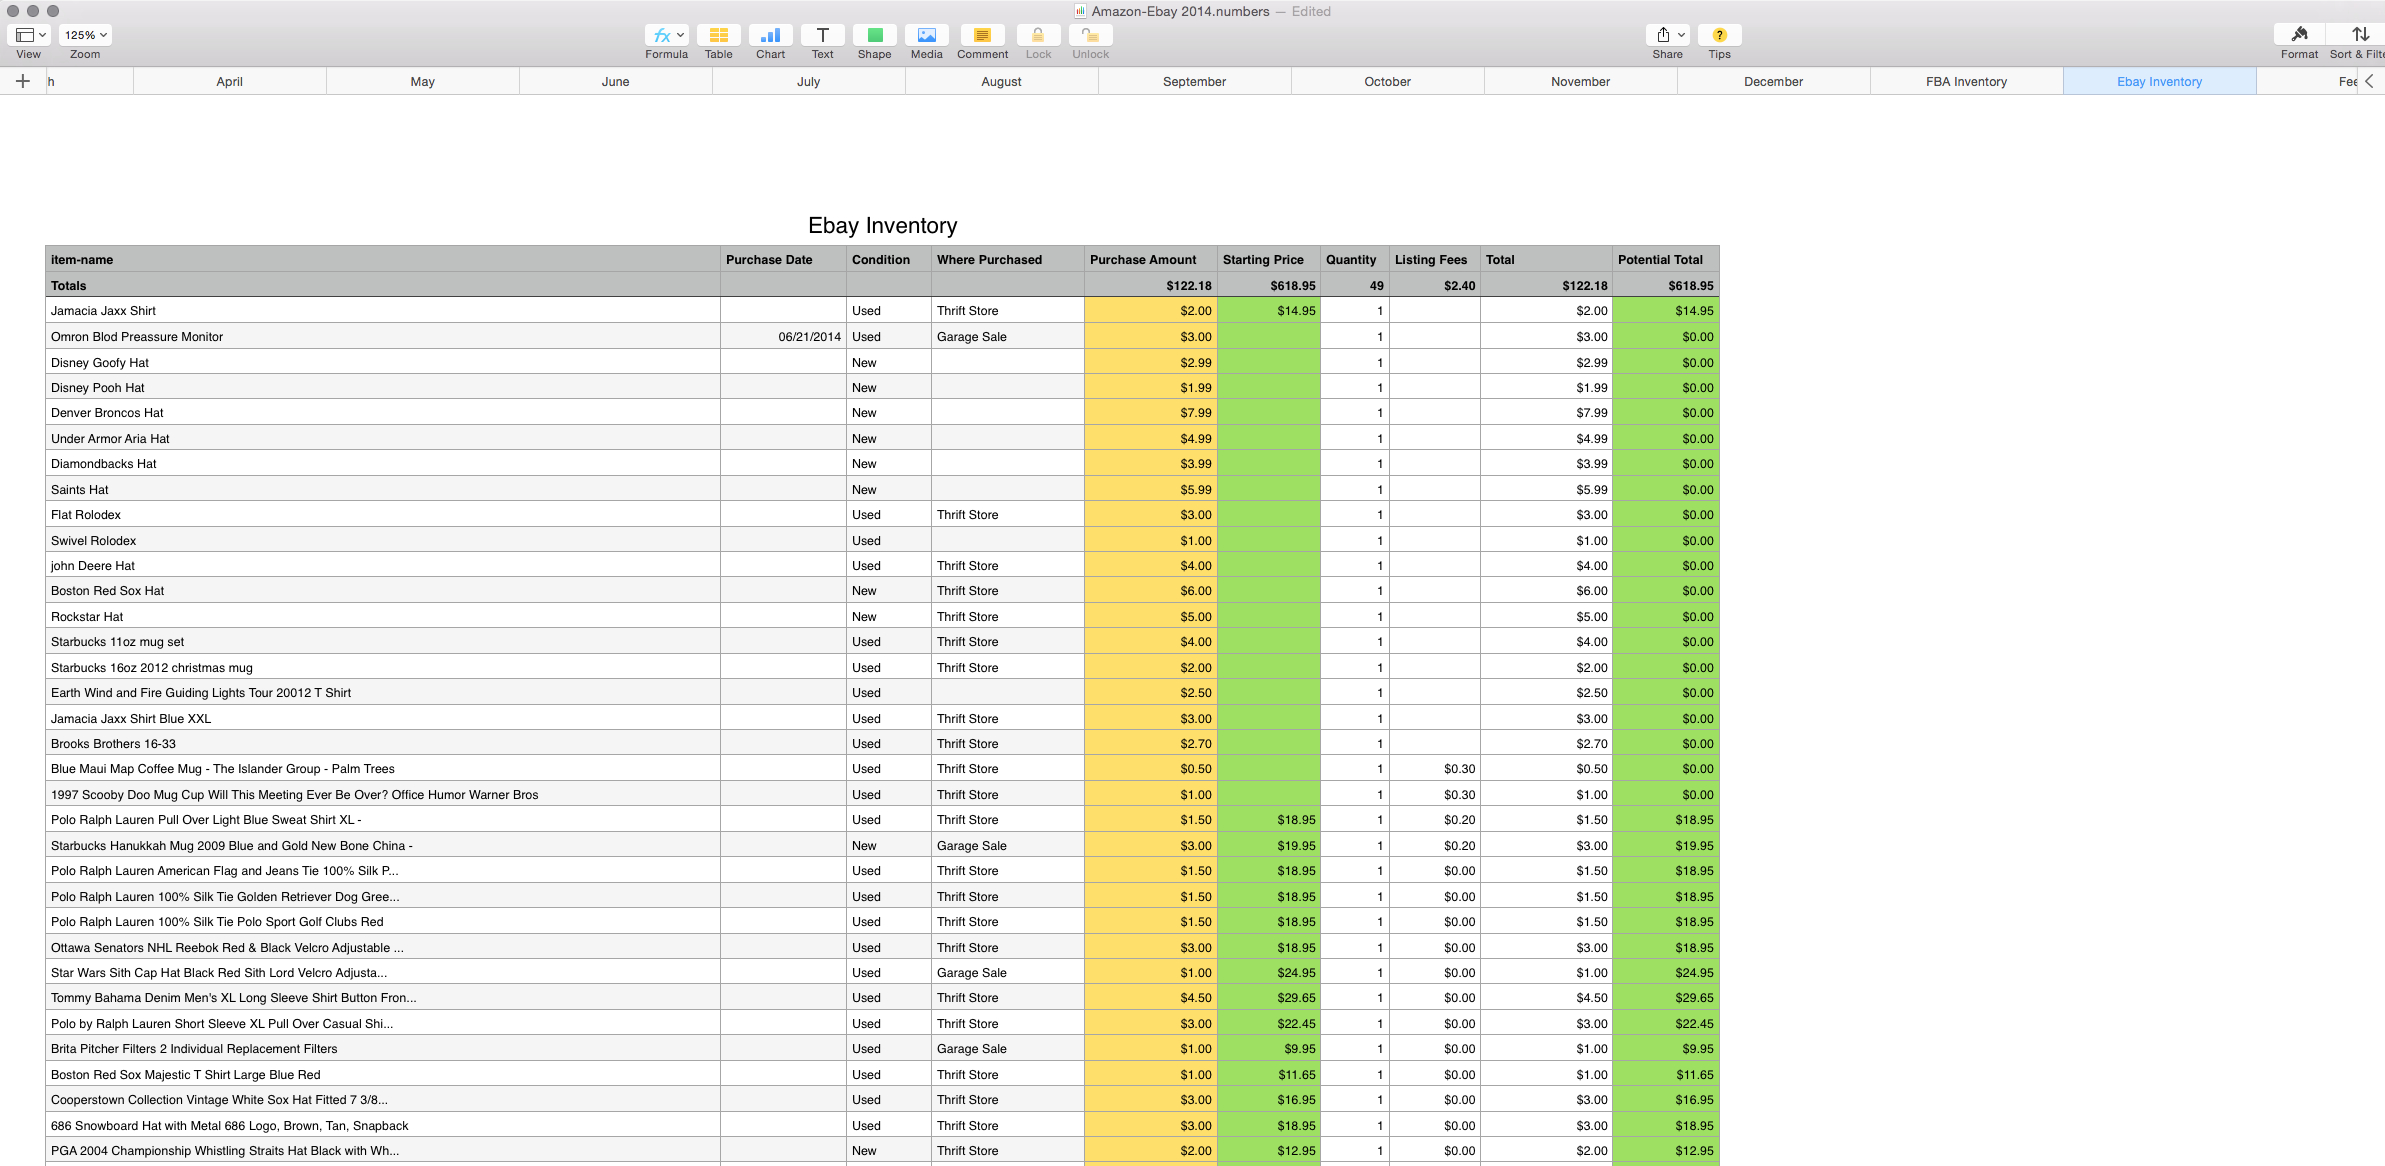 Sales Tracking Spreadsheet   Mac Numbers Template   My Multiple Streams To Ebay And Amazon Sales Tracking Spreadsheet